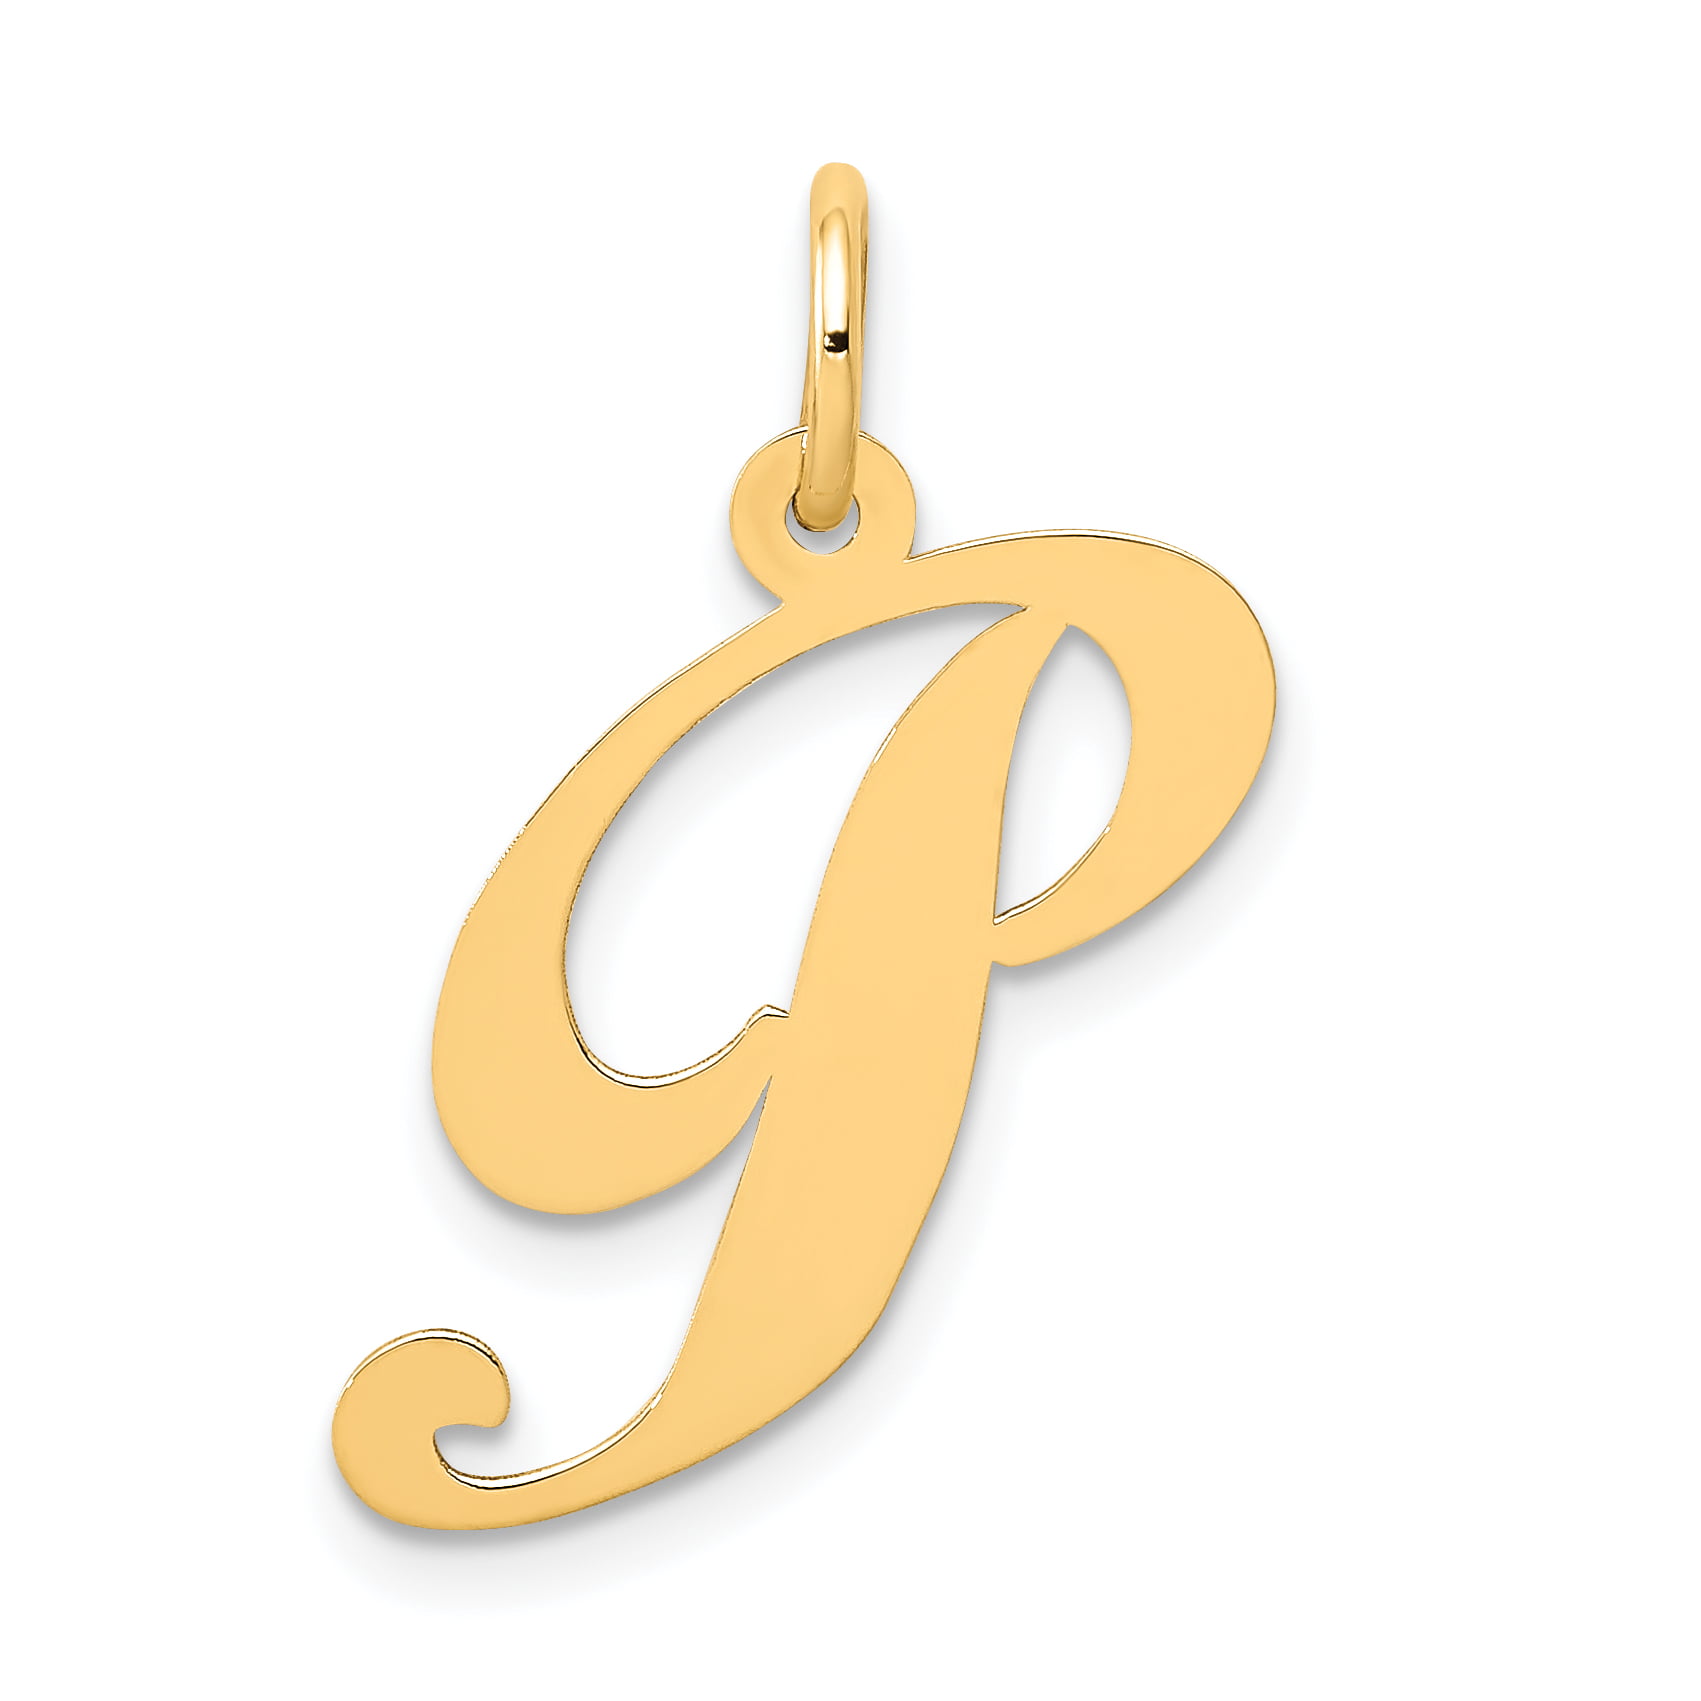 14k Yellow Gold Medium Script Initial Monogram Name Letter T Pendant Charm Necklace Fine Jewelry Gifts For Women For Her